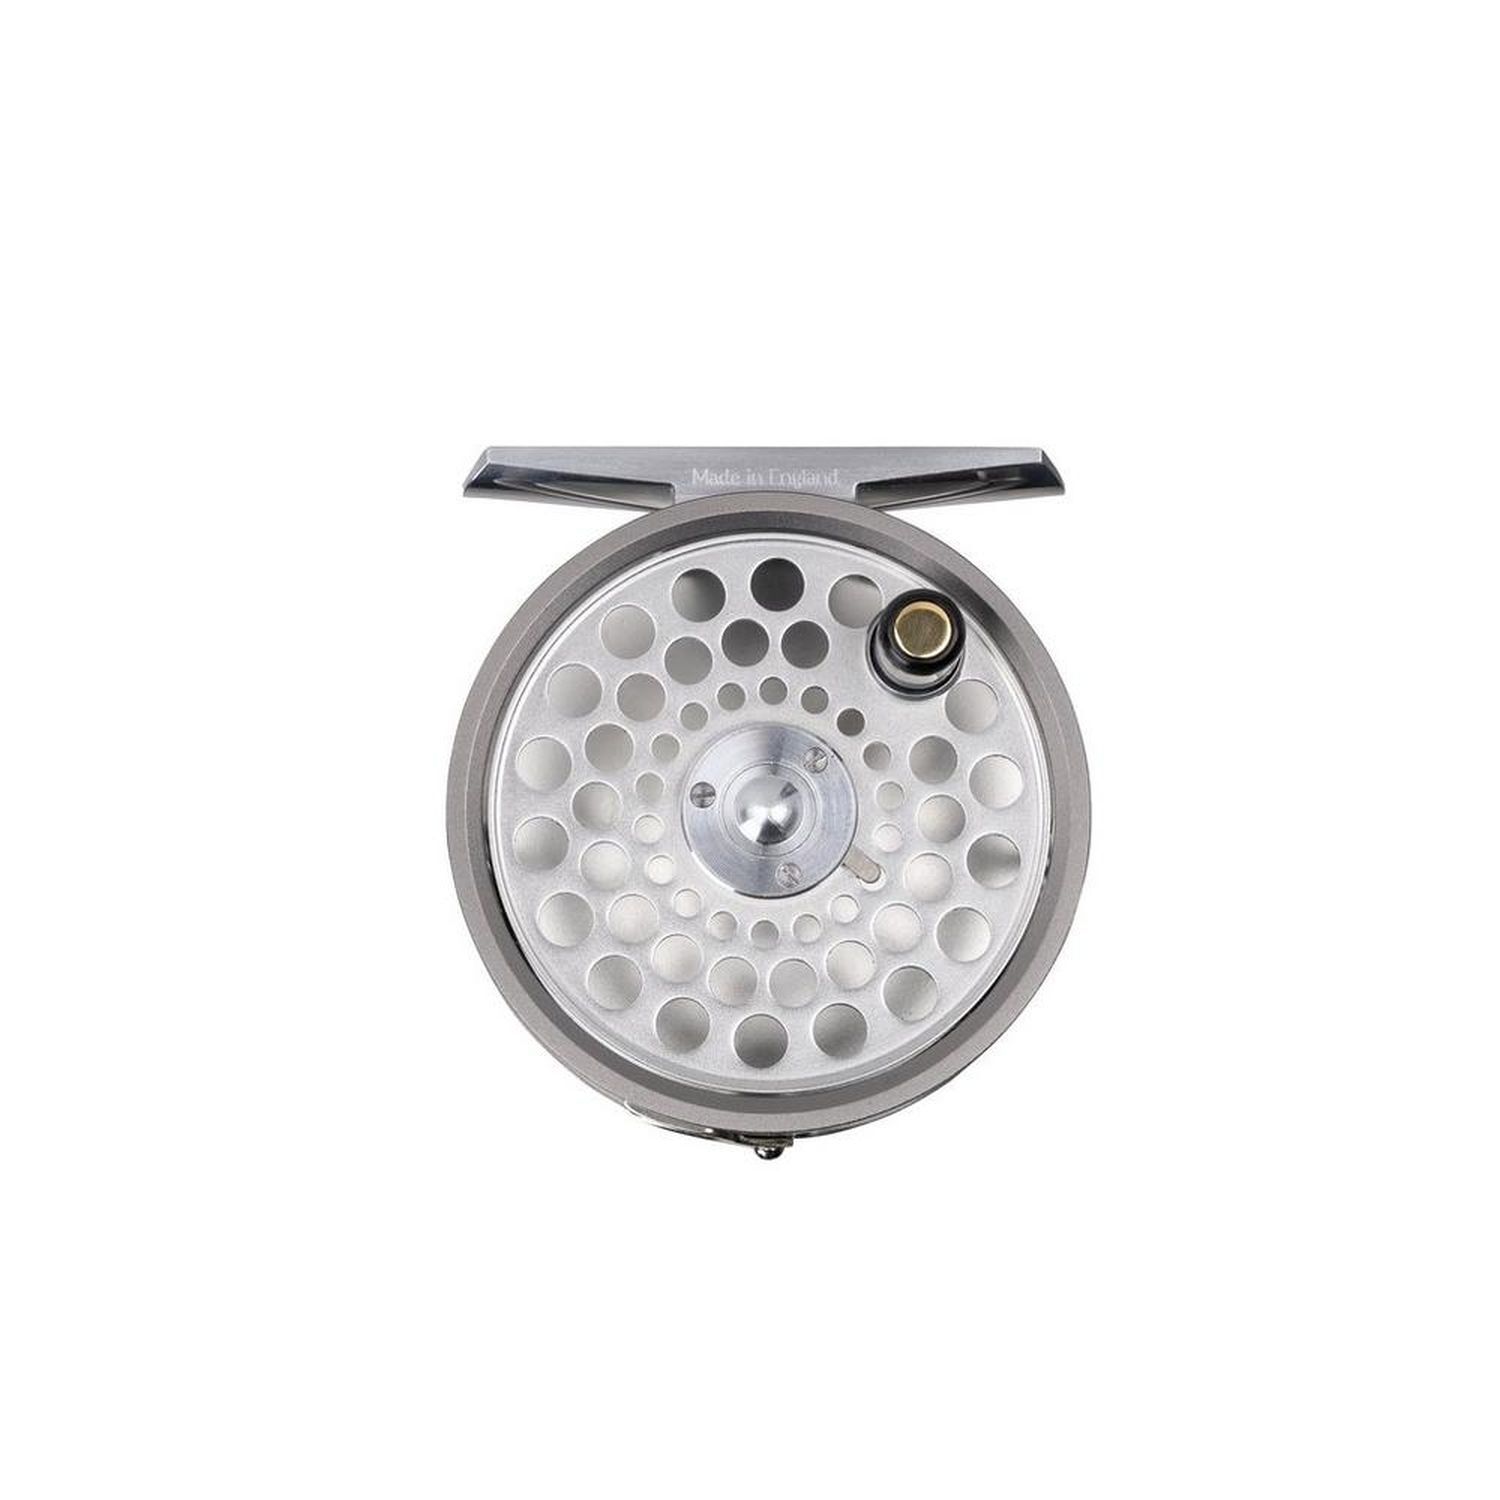 Snowbee Classic Fly Fishing Kit Saltwater online bobleisure